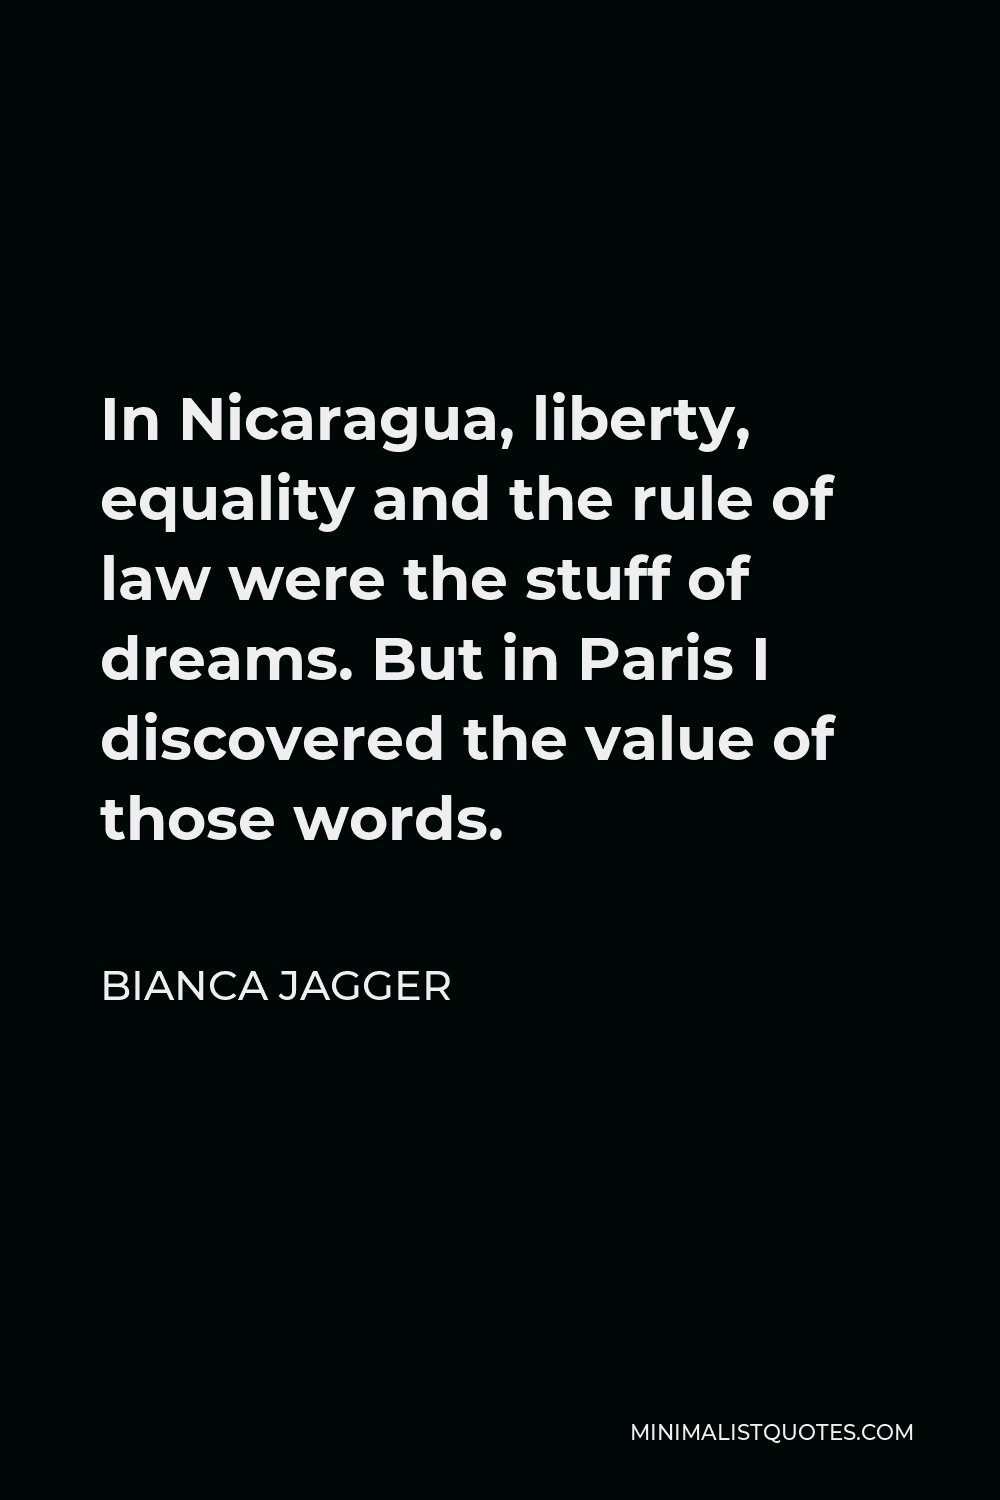 Bianca Jagger Quote - In Nicaragua, liberty, equality and the rule of law were the stuff of dreams. But in Paris I discovered the value of those words.